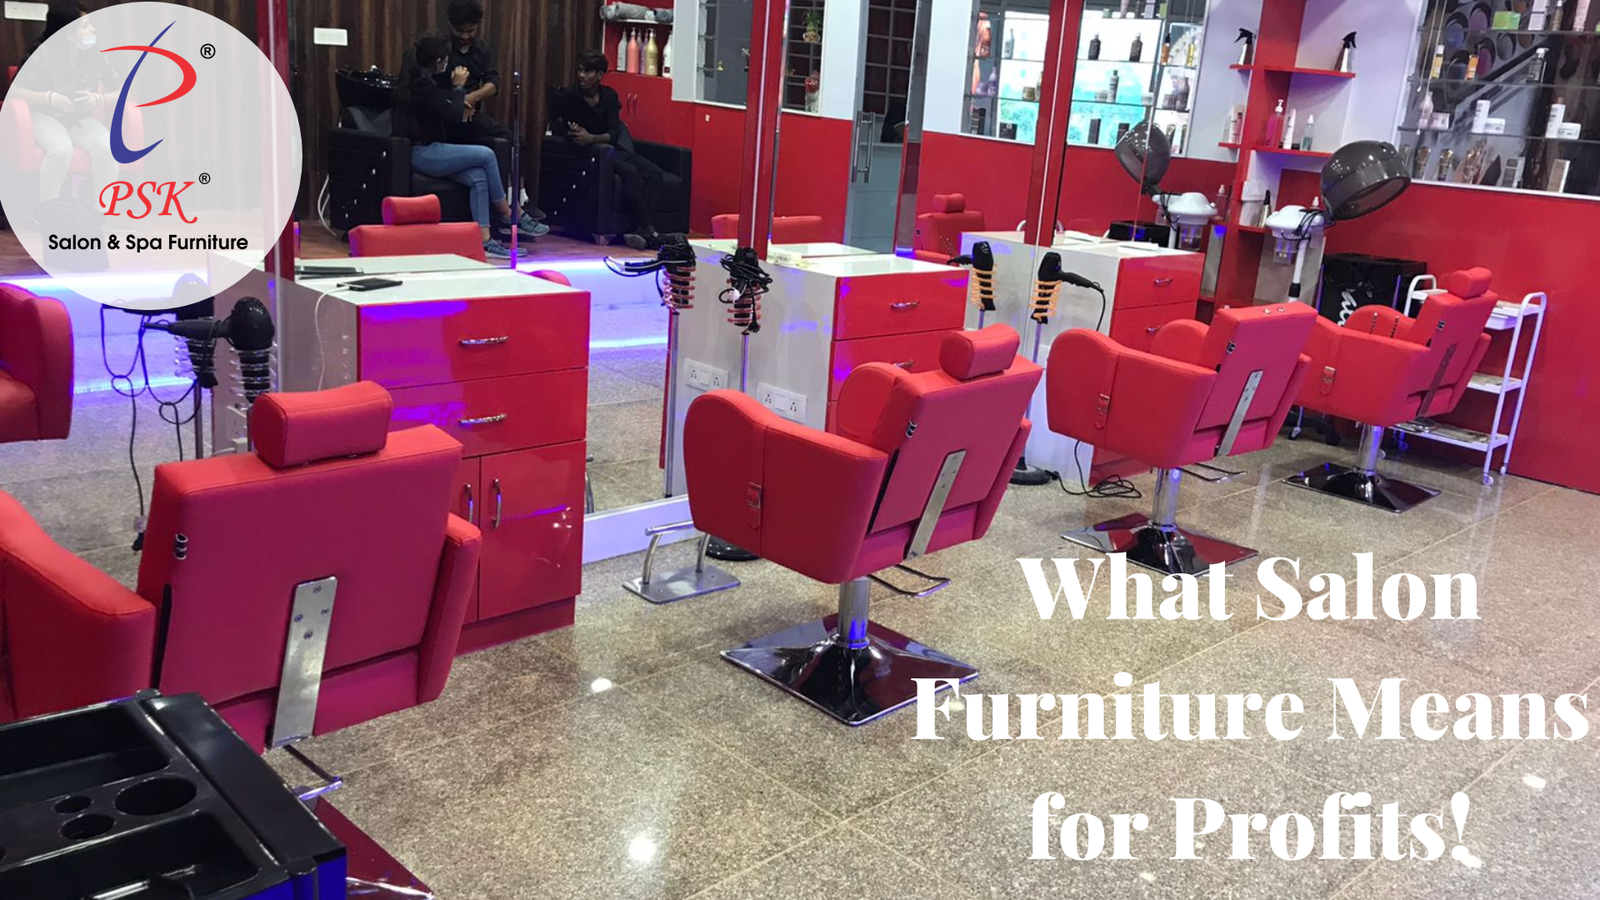 You are currently viewing What Salon Furniture Means for Profits!